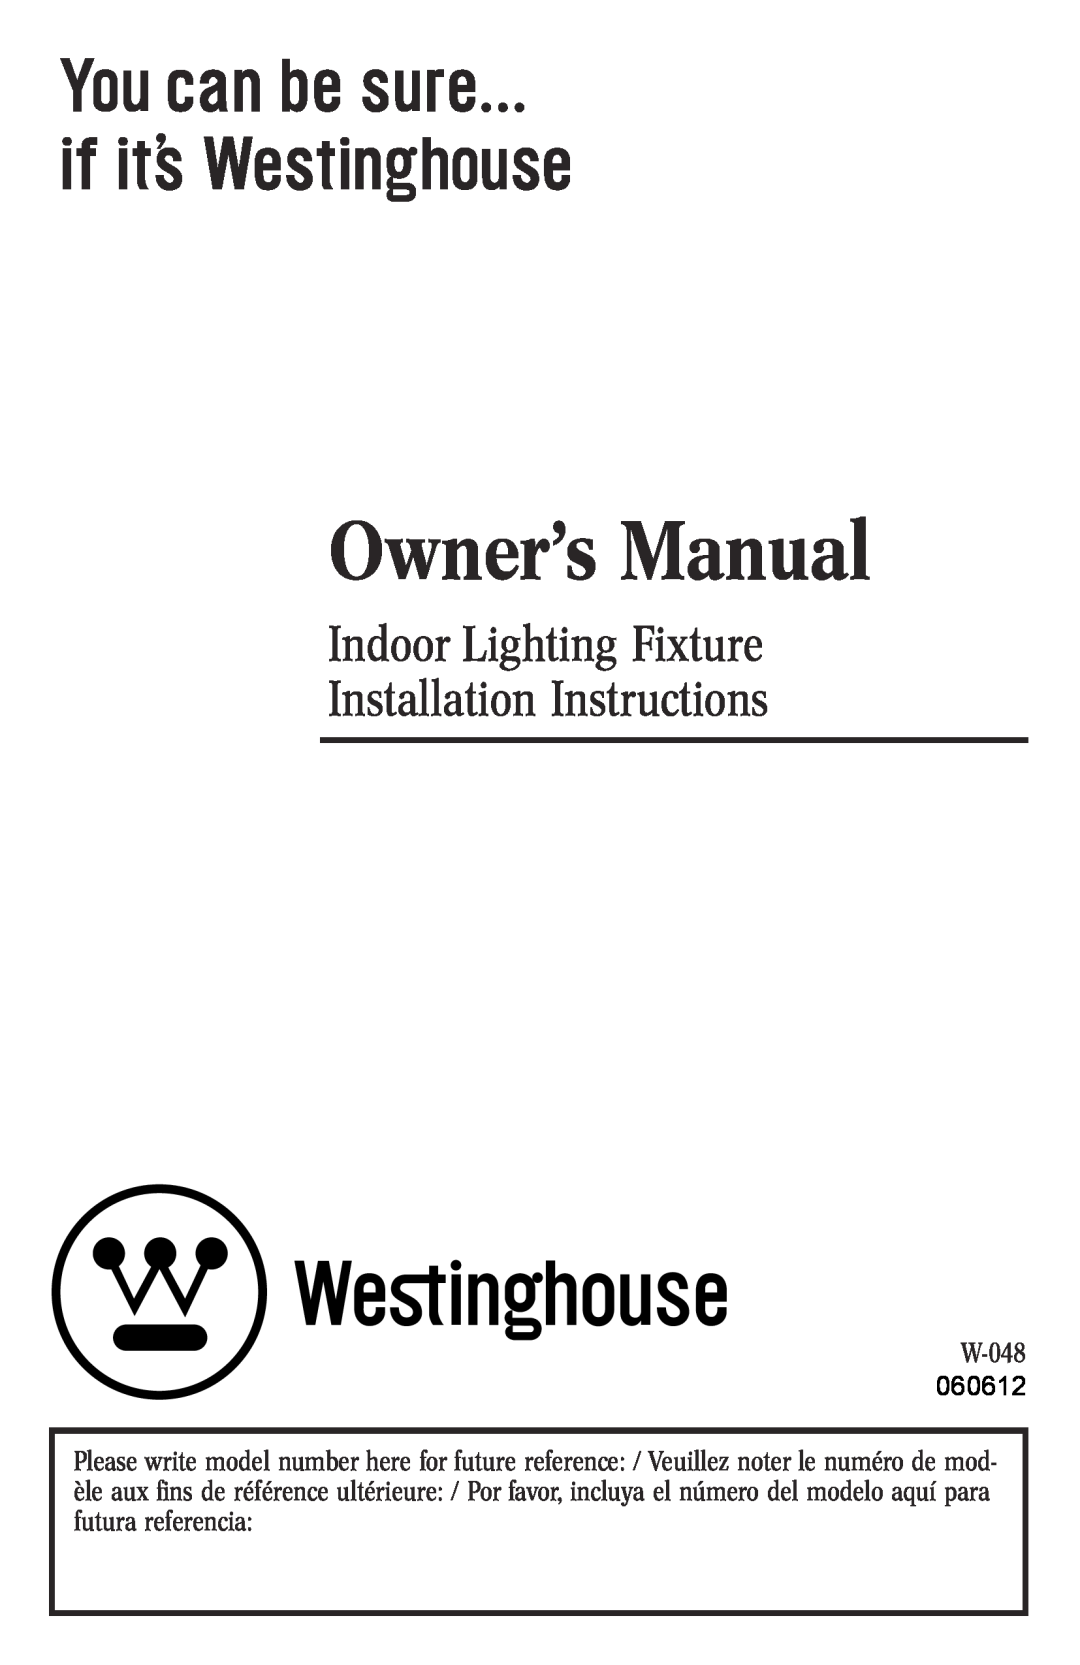 Westinghouse 60612, W-048 owner manual Indoor Lighting Fixture Installation Instructions 